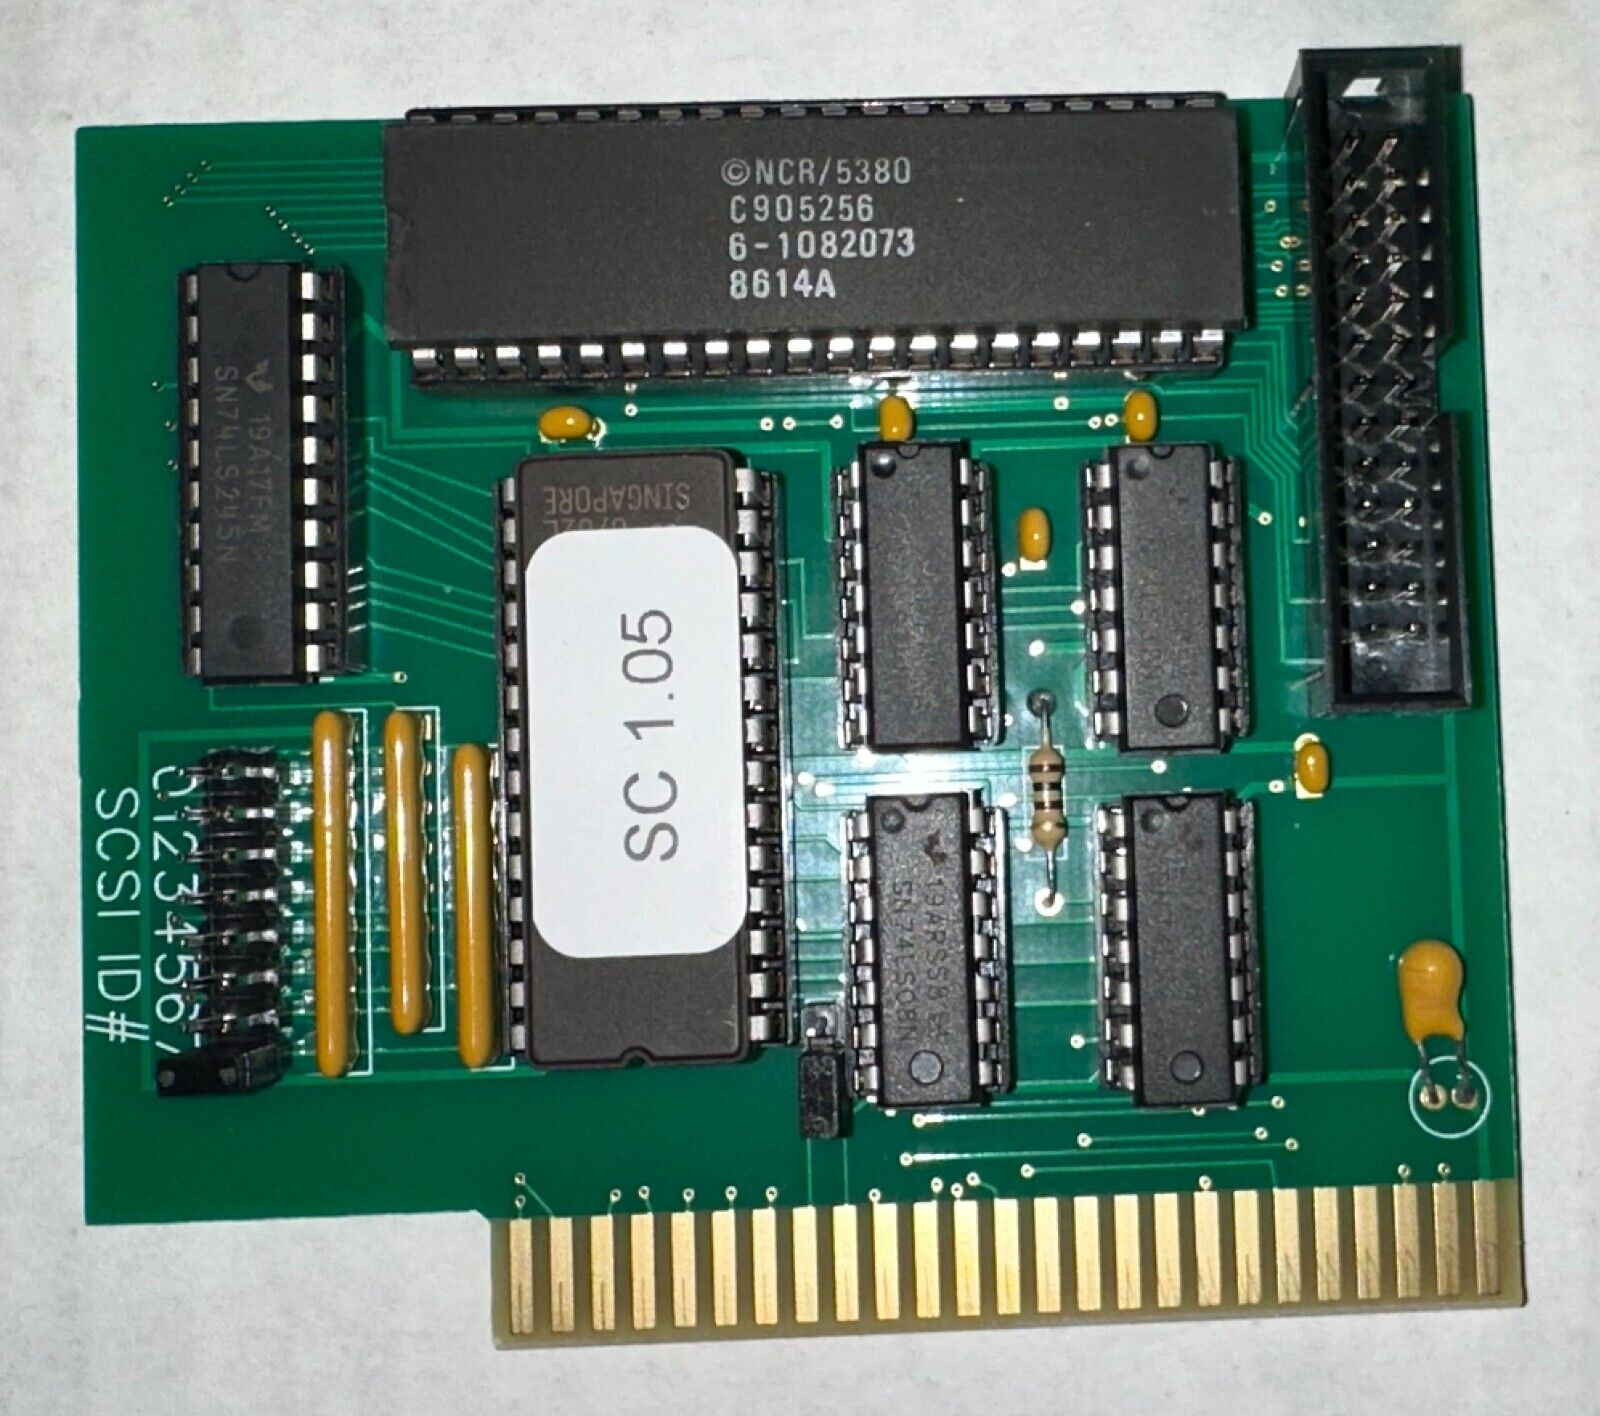 CIRTECH Apple II series SCSI Interface  - NEW Production, works with 4 OS's